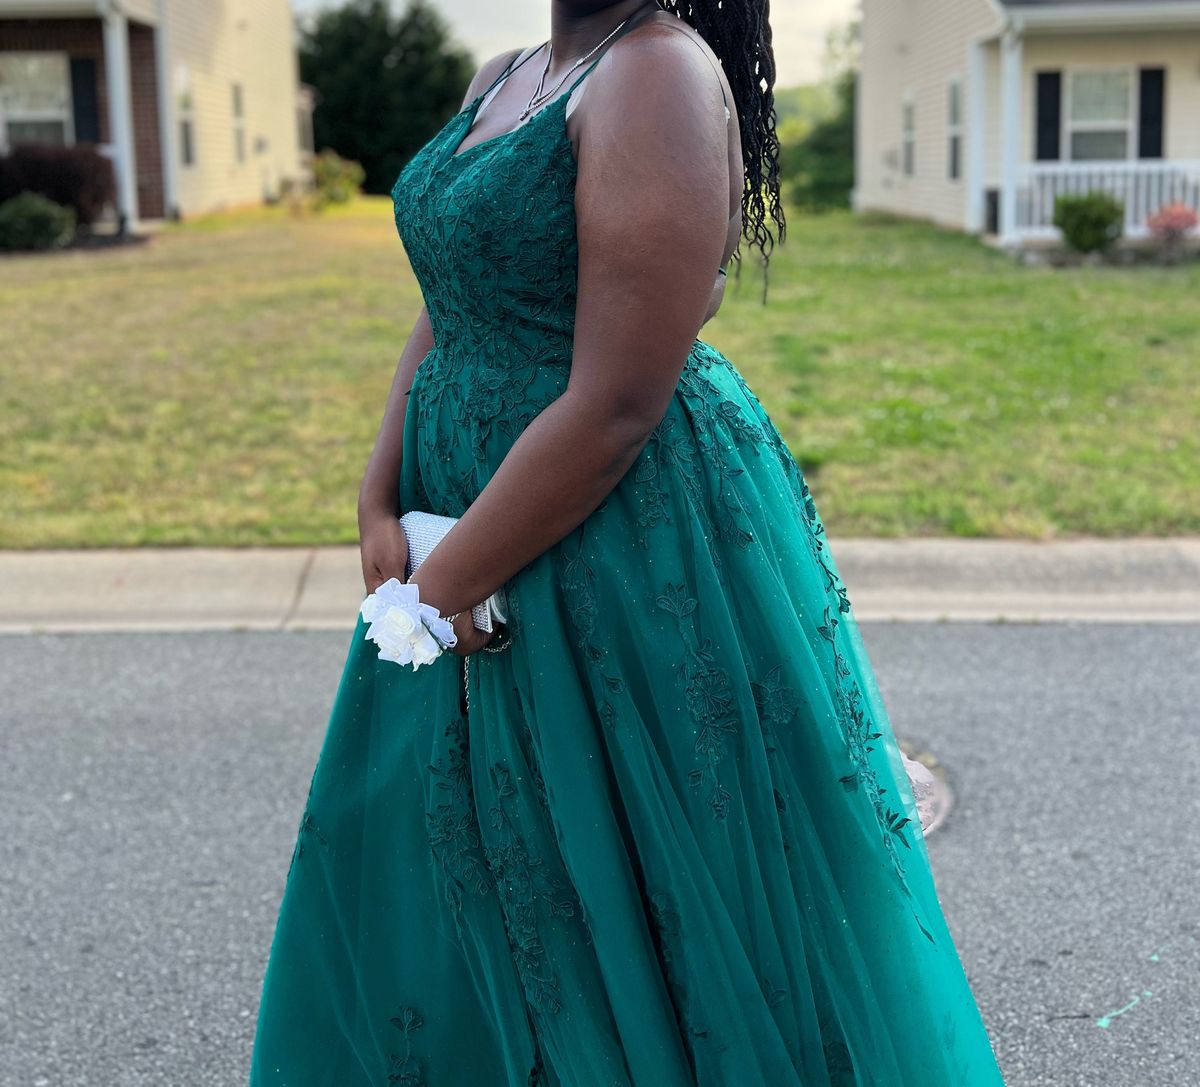 Style 87322 Amarra Plus Size 18 Prom Plunge Green Ball Gown on Queenly